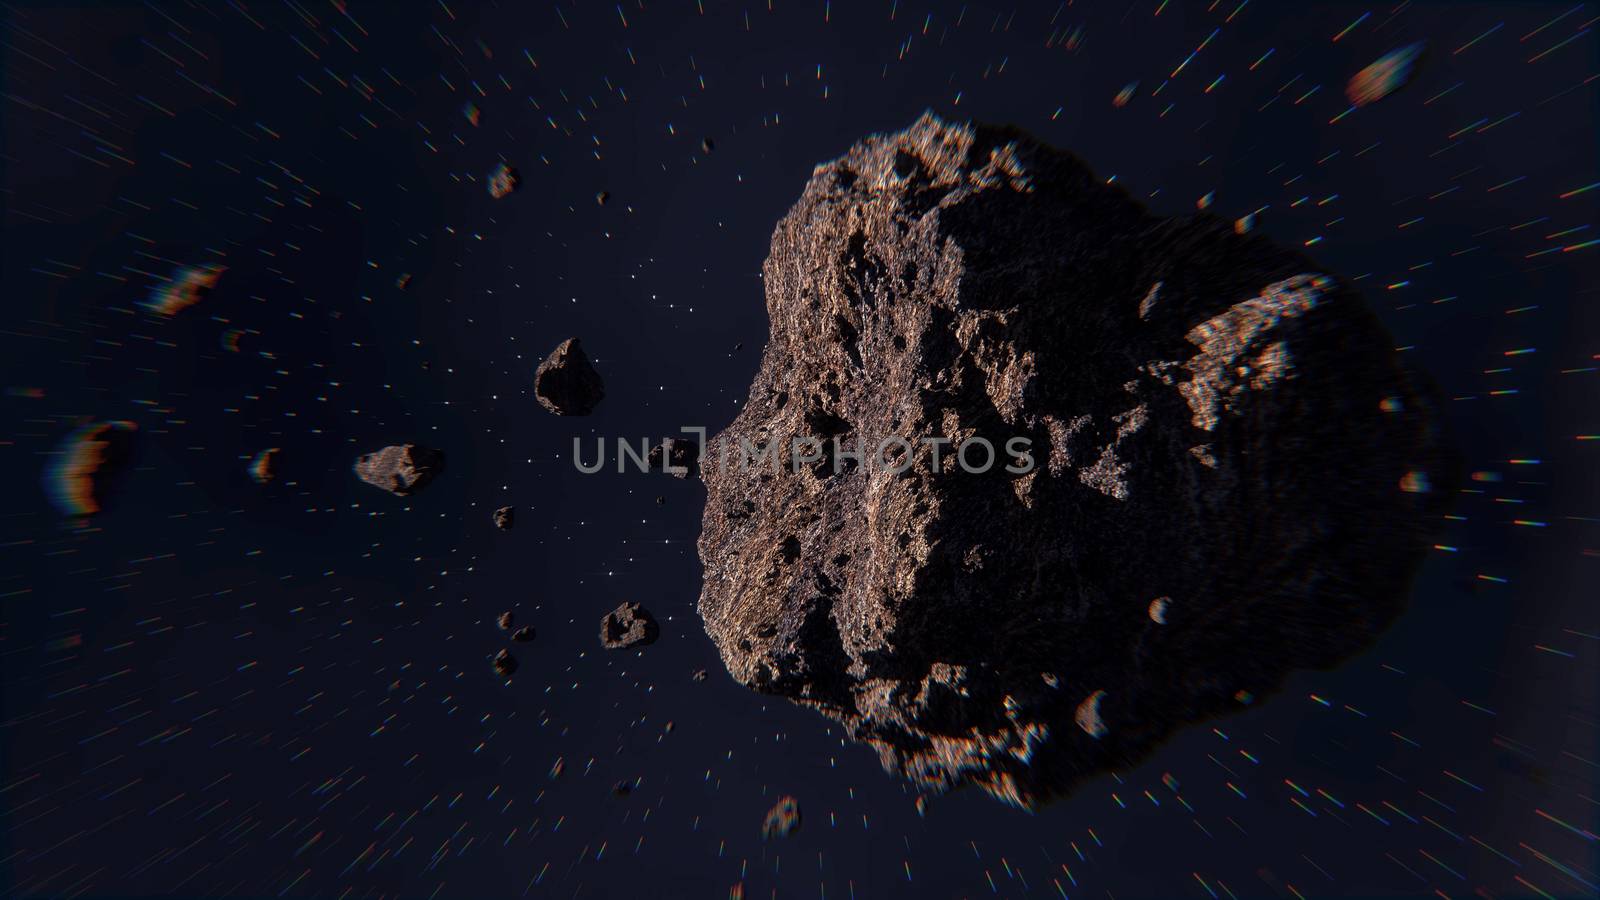 Illustration of space scene with asteroids